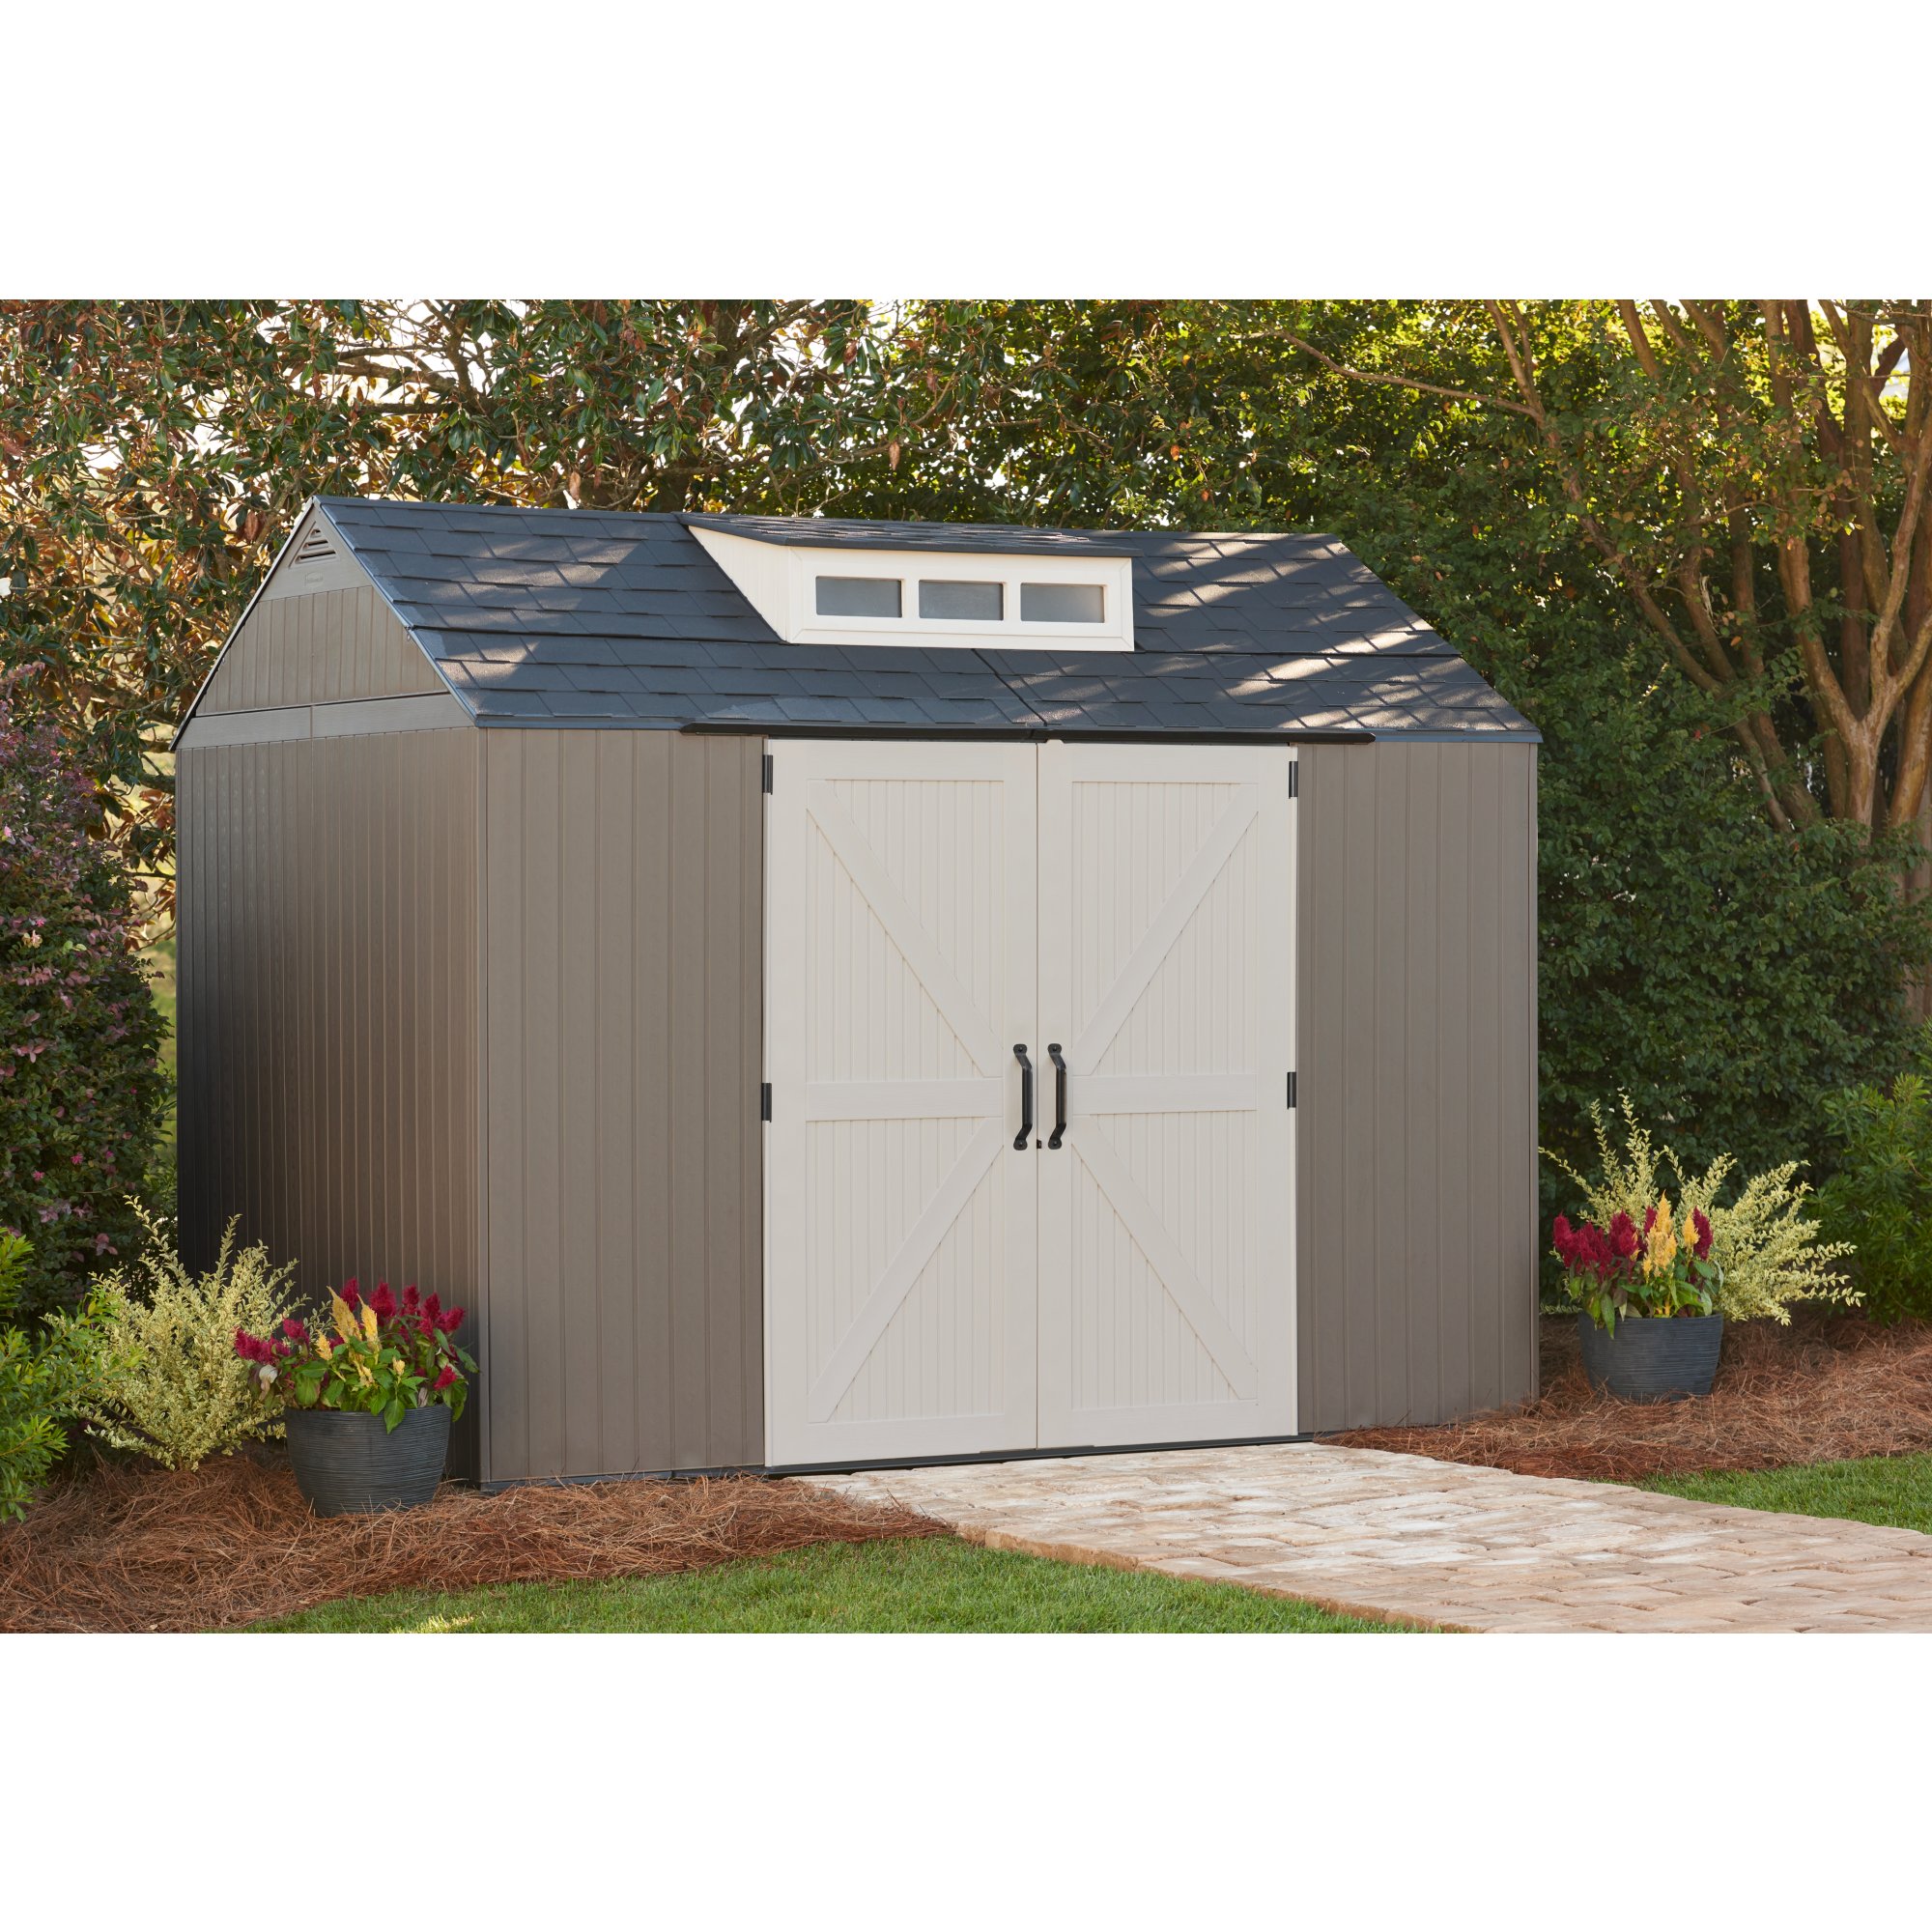 Rubbermaid Indoor/Outdoor Storage Sheds at Material Handling